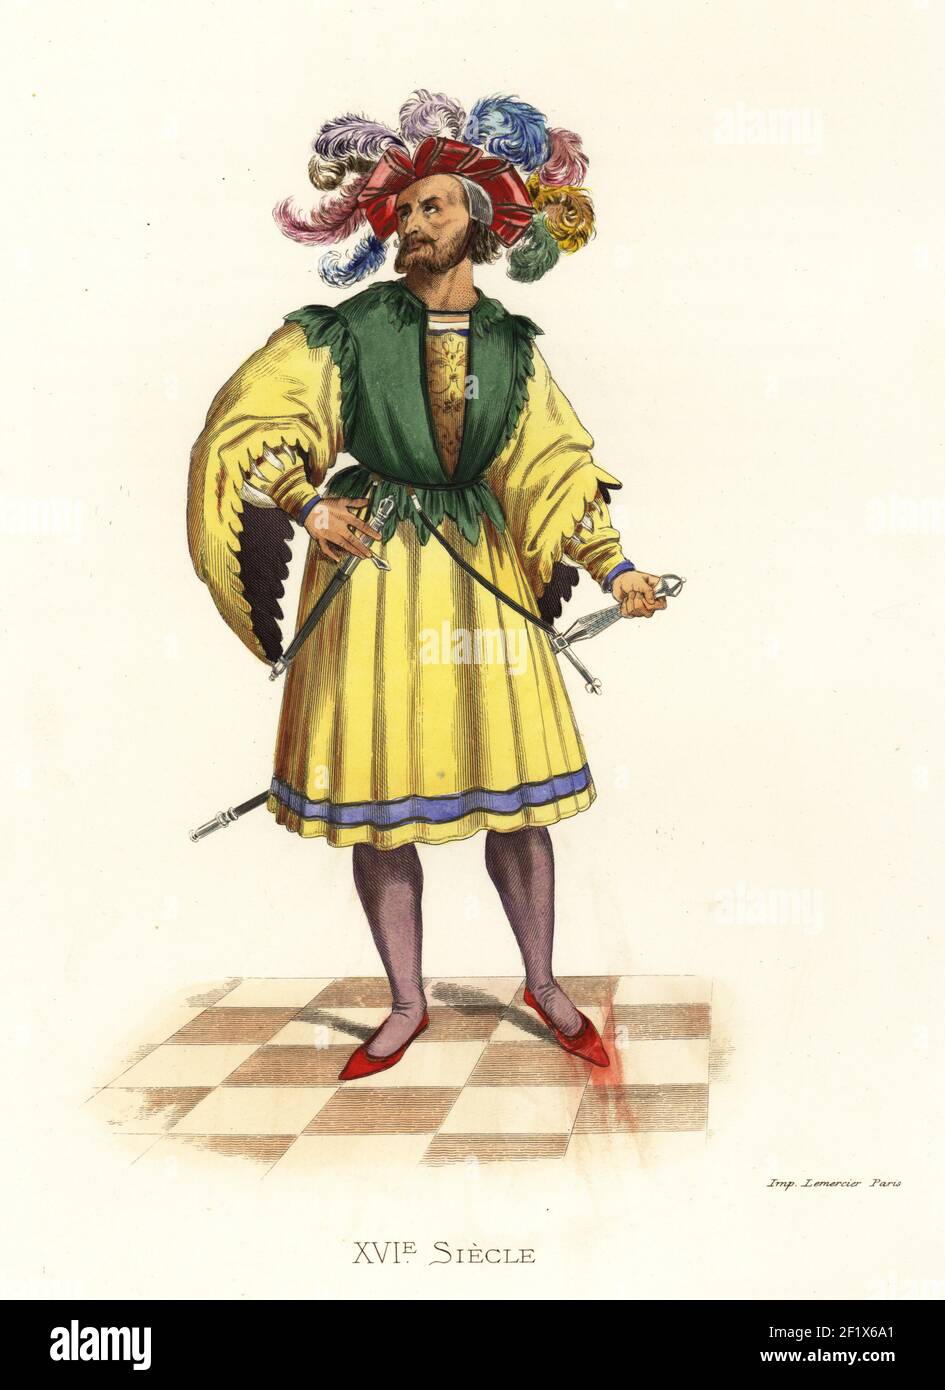 Kress de Kressenstein, a Patrician of Nuremberg, 16th century. He wears a plumed felt hat, damask brocade plastron, yellow puff sleeves and skirt, flesh-colour hose, red slippers, belt with dagger and sword. Patricien de Nuremberg. After Patriciens de Nuremberg, coloured by G. Schneider, 1617. Handcolored lithograph after an illustration by Edmond Lechevallier-Chevignard from Georges Duplessis's Costumes historiques des XVIe, XVIIe et XVIIIe siecles (Historical costumes of the 16th, 17th and 18th centuries), Paris, 1867. Edmond Lechevallier-Chevignard was an artist, book illustrator, and inter Stock Photo